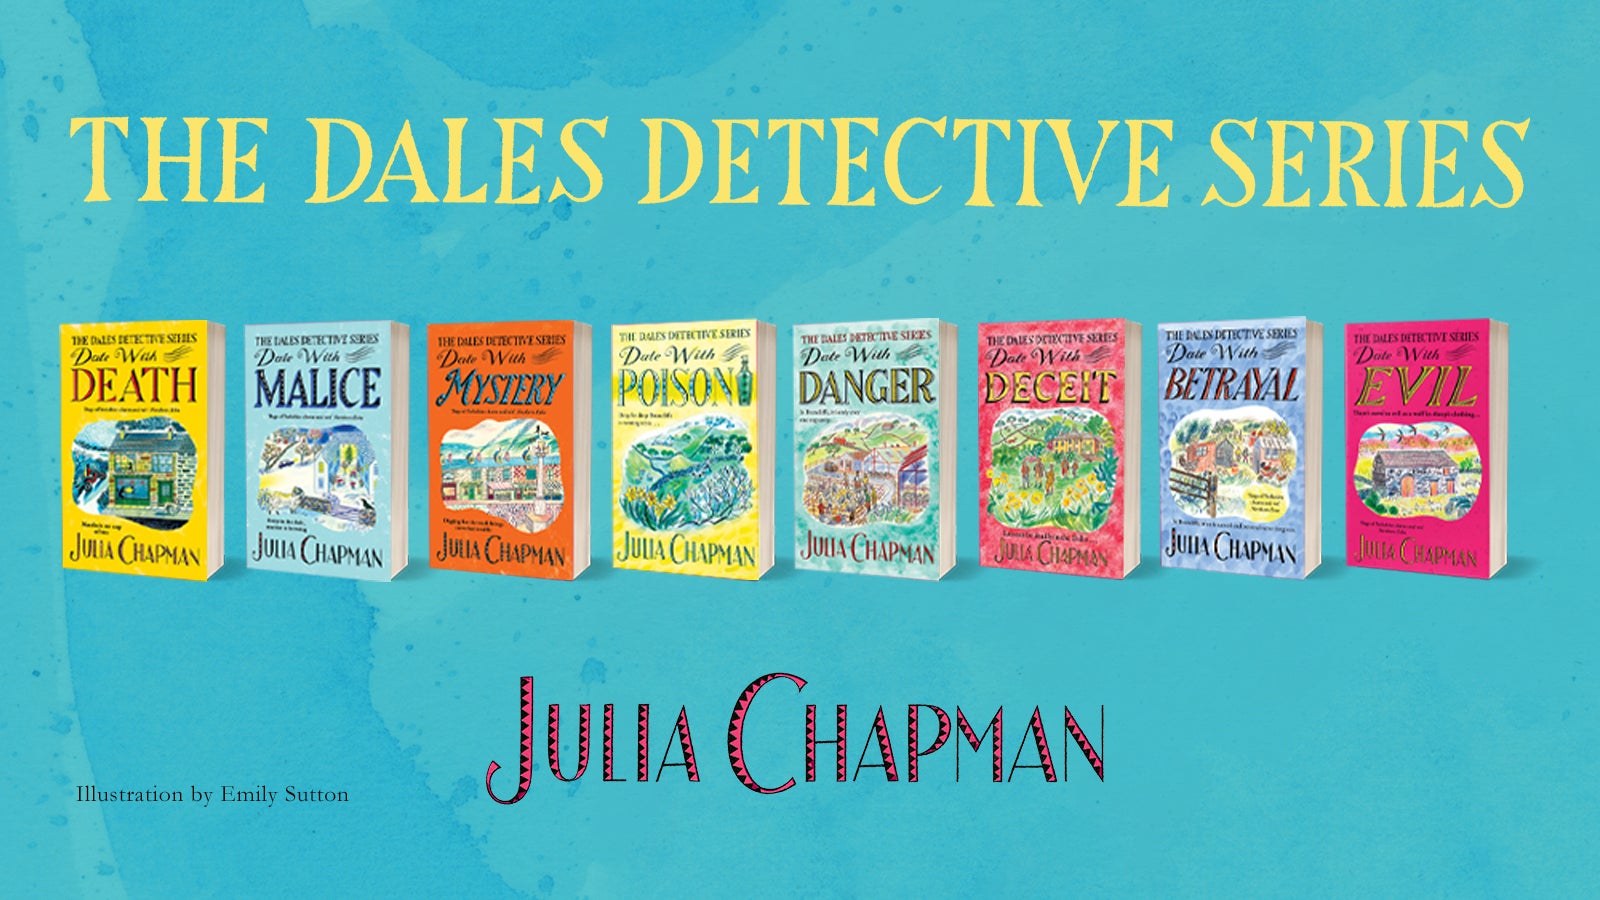 The Dales Detective Series by Julia Chapman